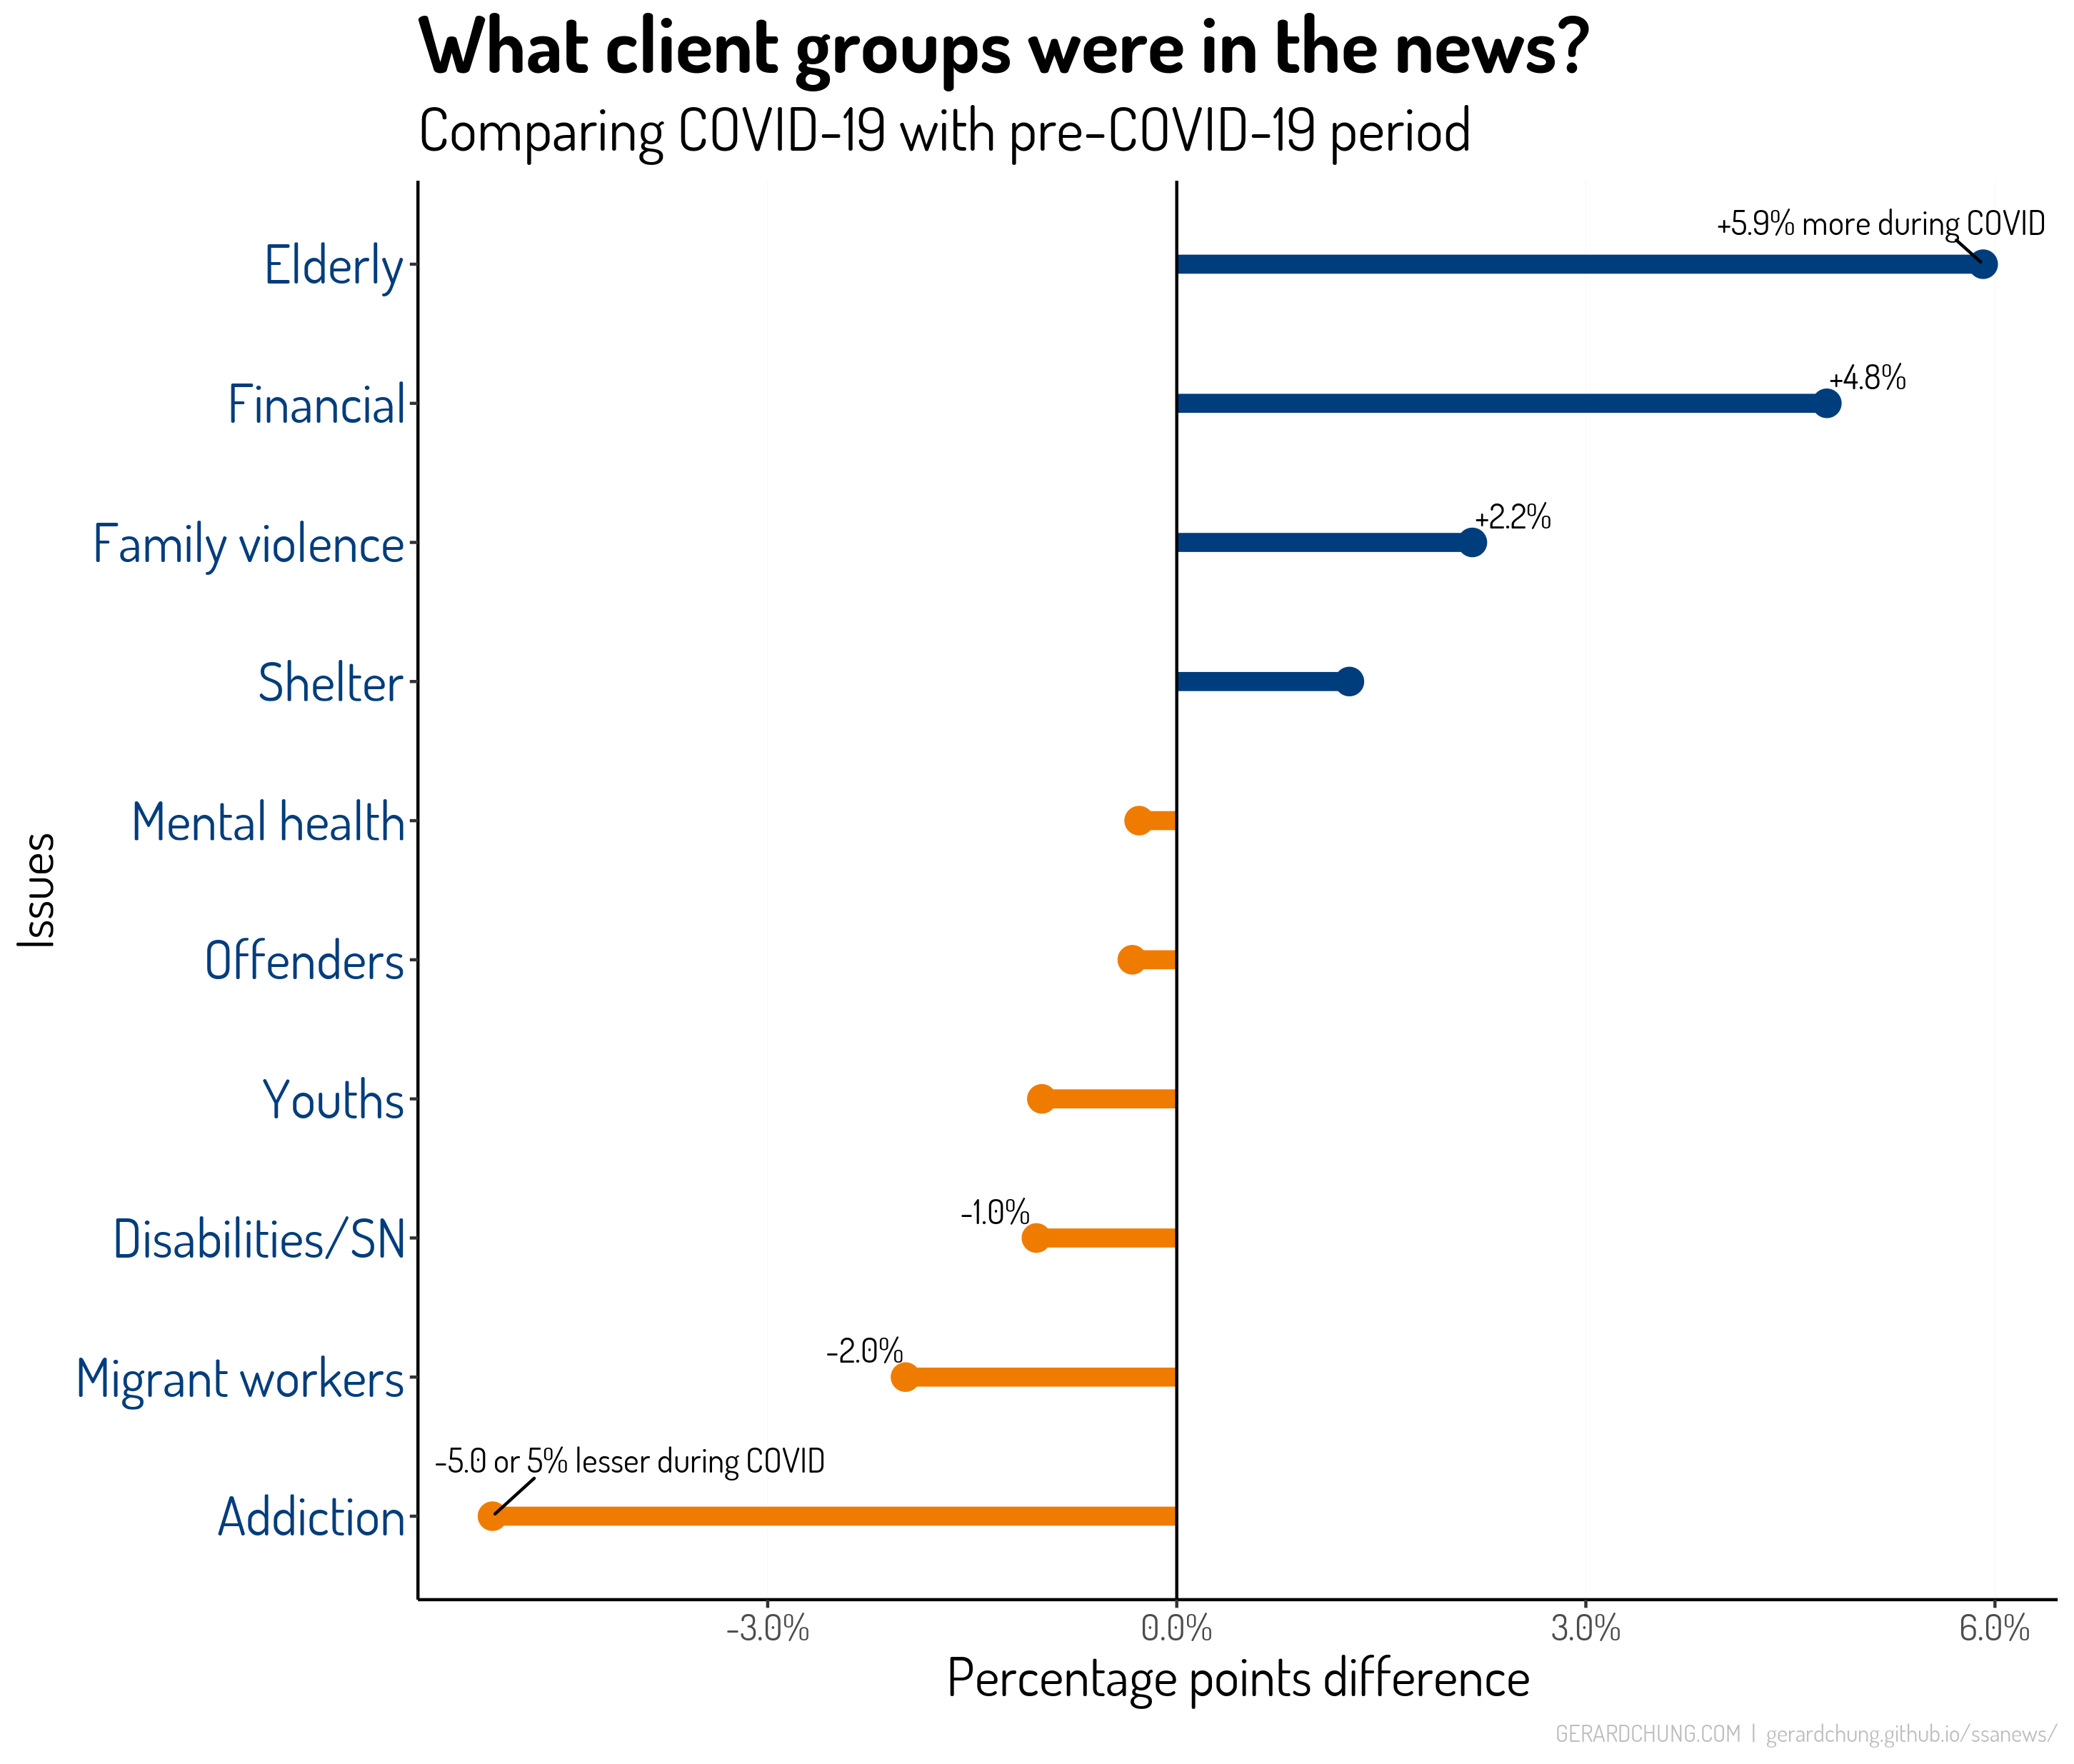 Figure 9 - Client groups in news comparing pandemic and pre-pandemic